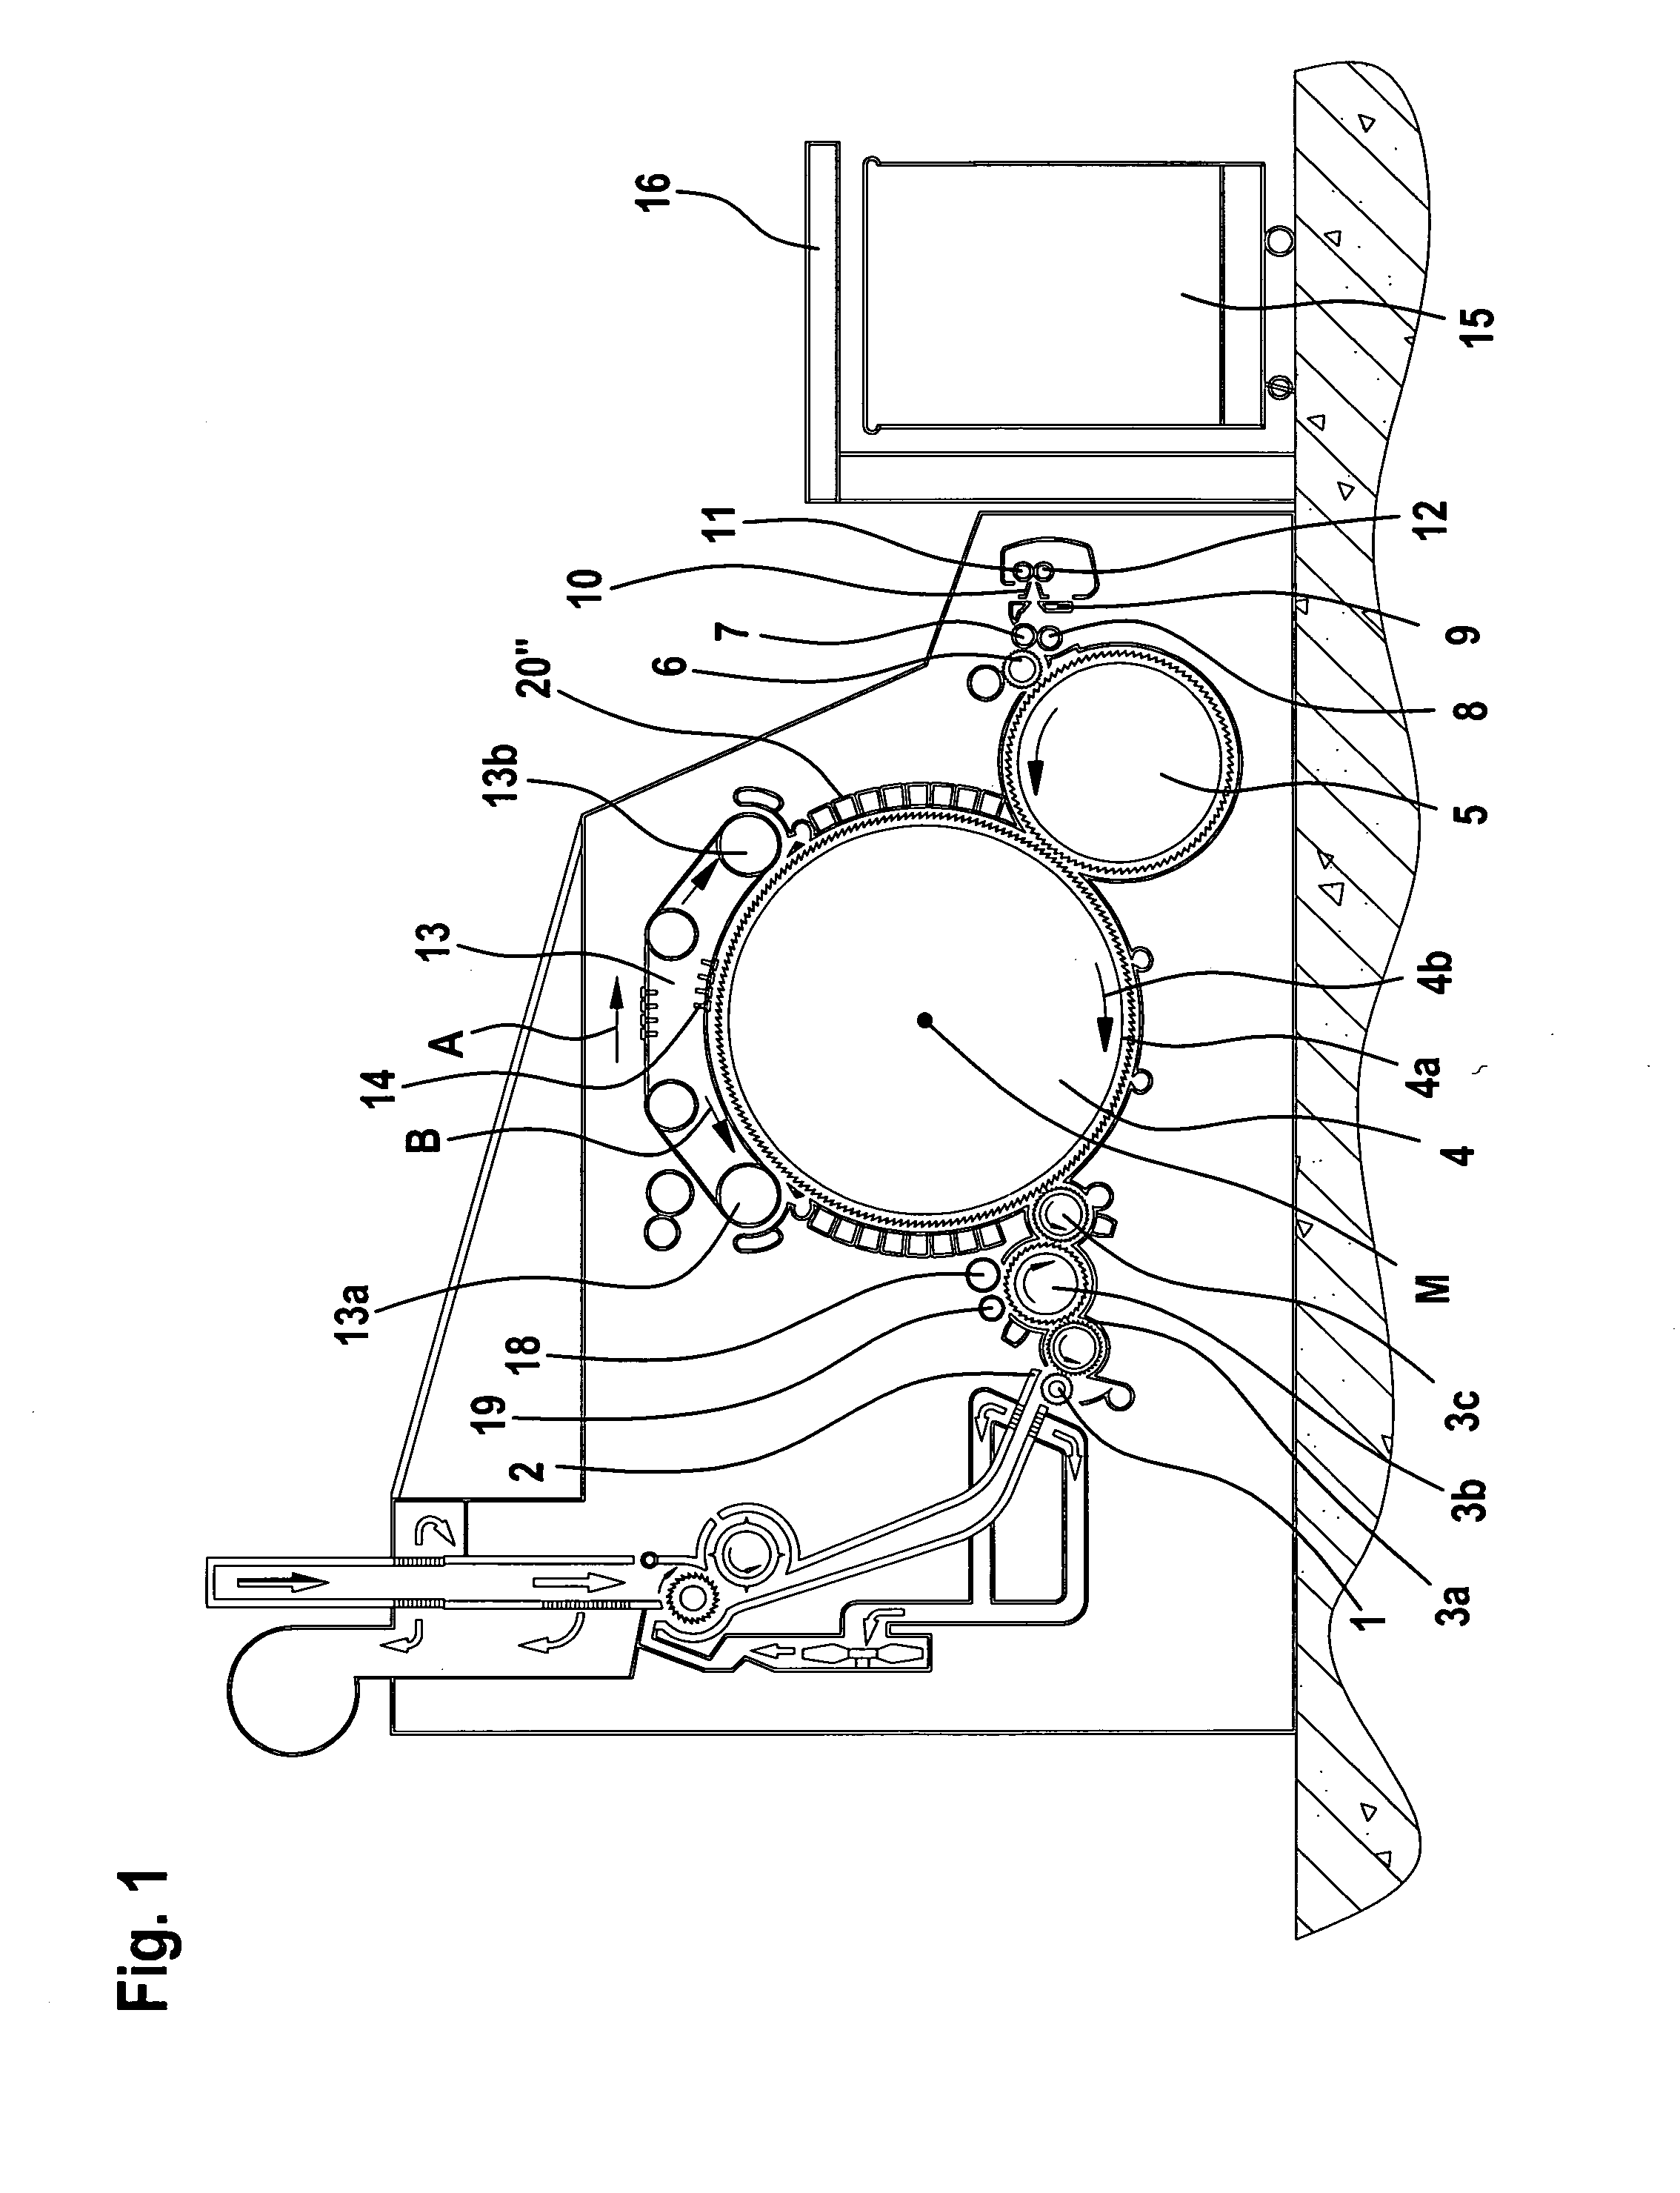 Apparatus on a textile machine for cleaning fibre material, for example of cotton, comprising a high-speed first or main roller